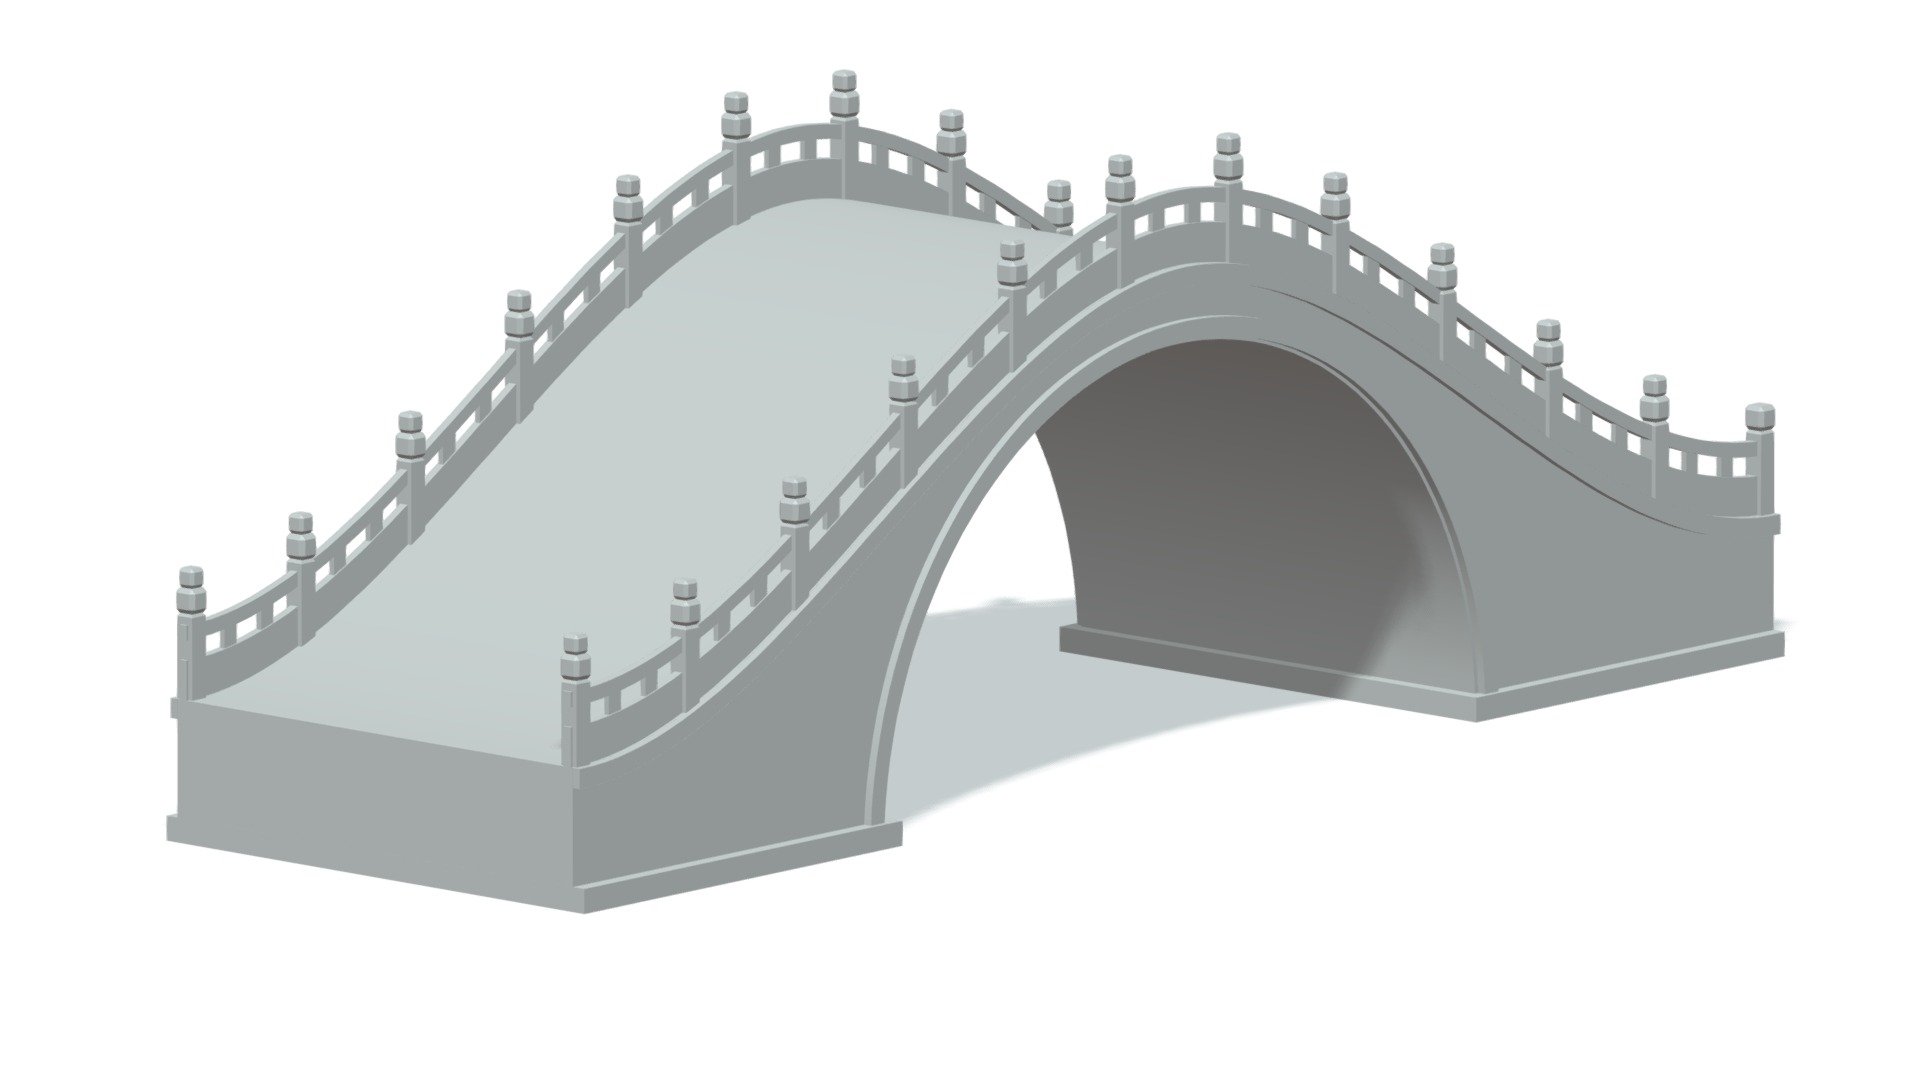 -Cartoon Chinese Stone Bridge.

-This product contains 9 objects.

-Total vert: 4,916, poly: 4,692.

-Materials and objects have the correct names.

-This product was created in Blender 2.935.

-Formats: blend, fbx, obj, c4d, dae, abc, stl, glb, unity.

-We hope you enjoy this model.

-Thank you 3d model